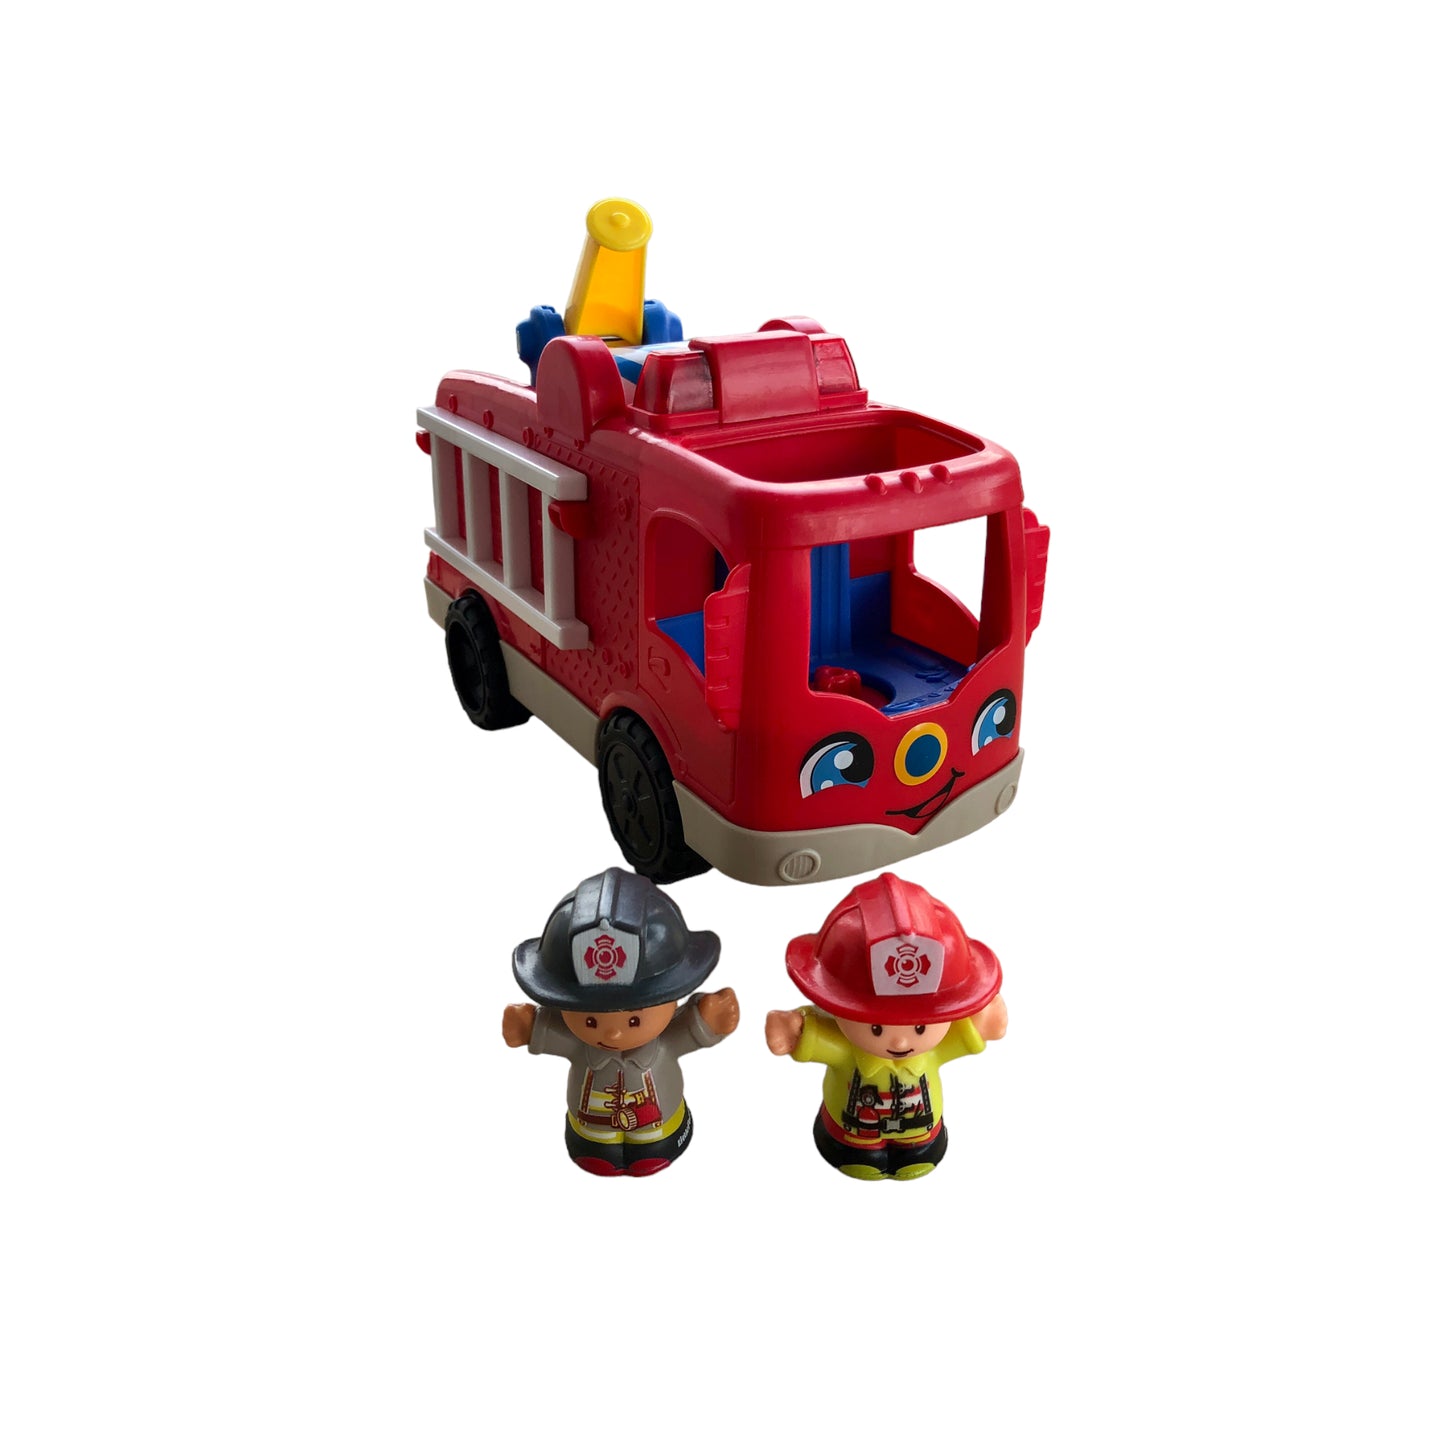 Fisher Price - Little People Helping Others Fire Truck